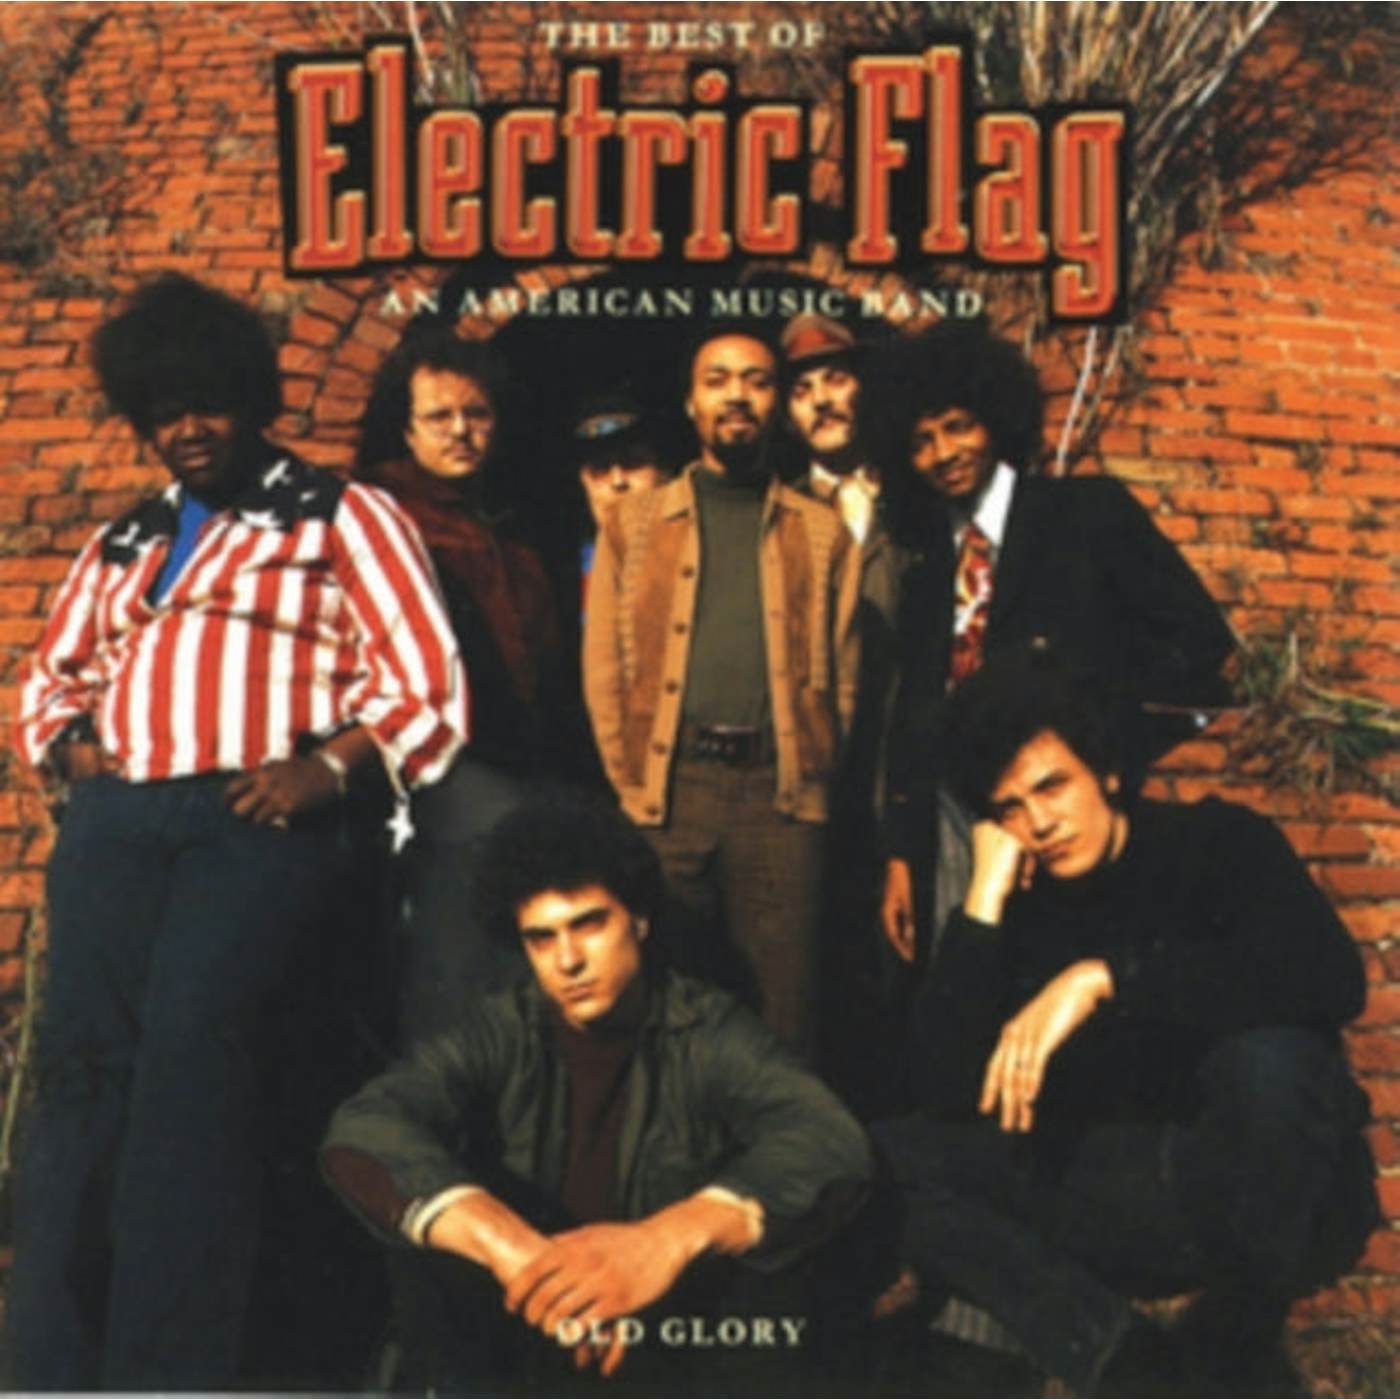 The Electric Flag CD - The Best Of Electric Flag An American Music Band